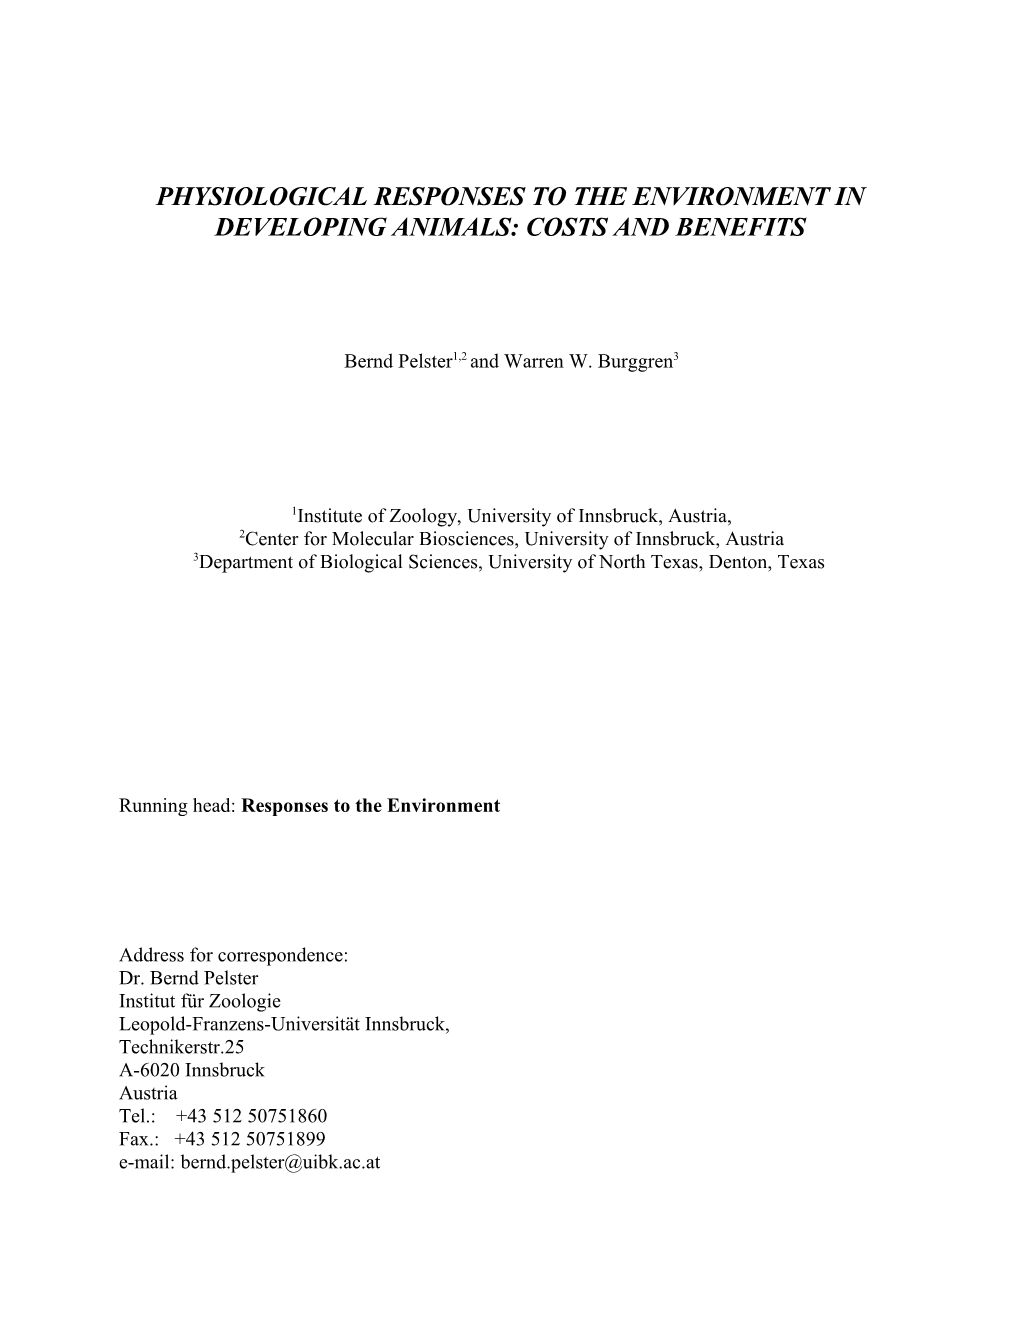 Physiological Responses to the Environment in Developing Animals: Costs and Benefits